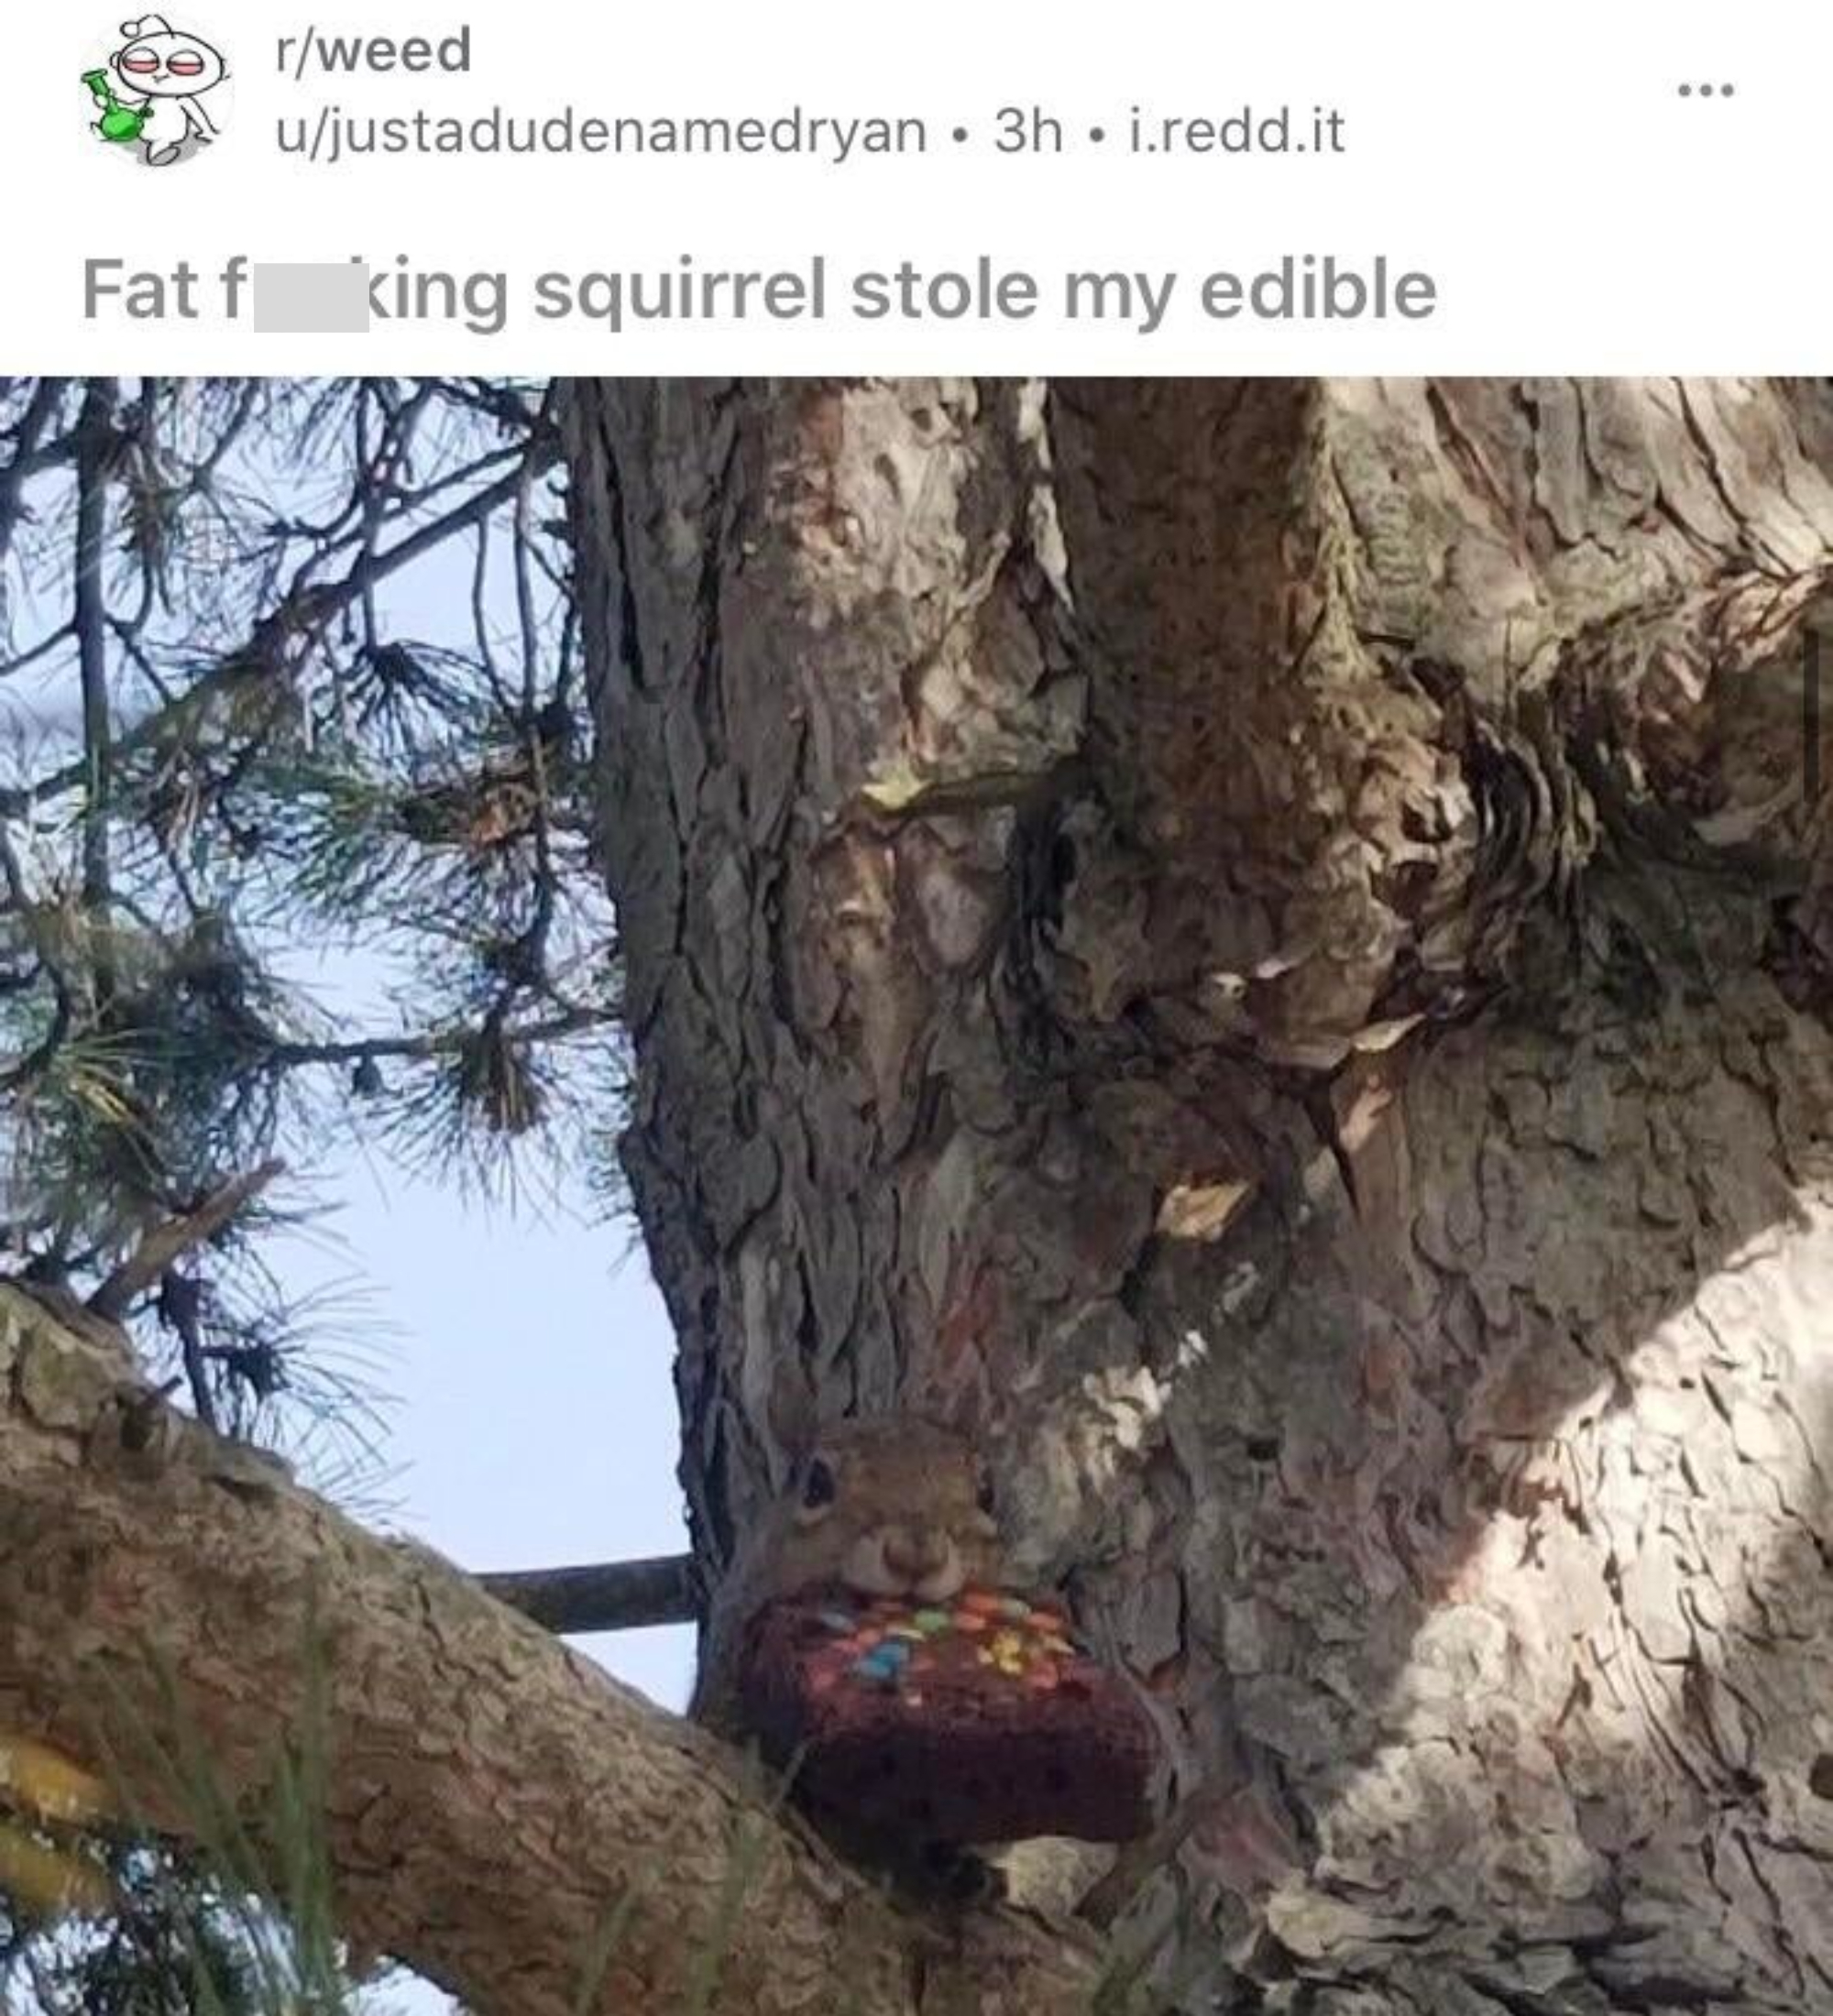 A squirrel with a brownie in its mouth